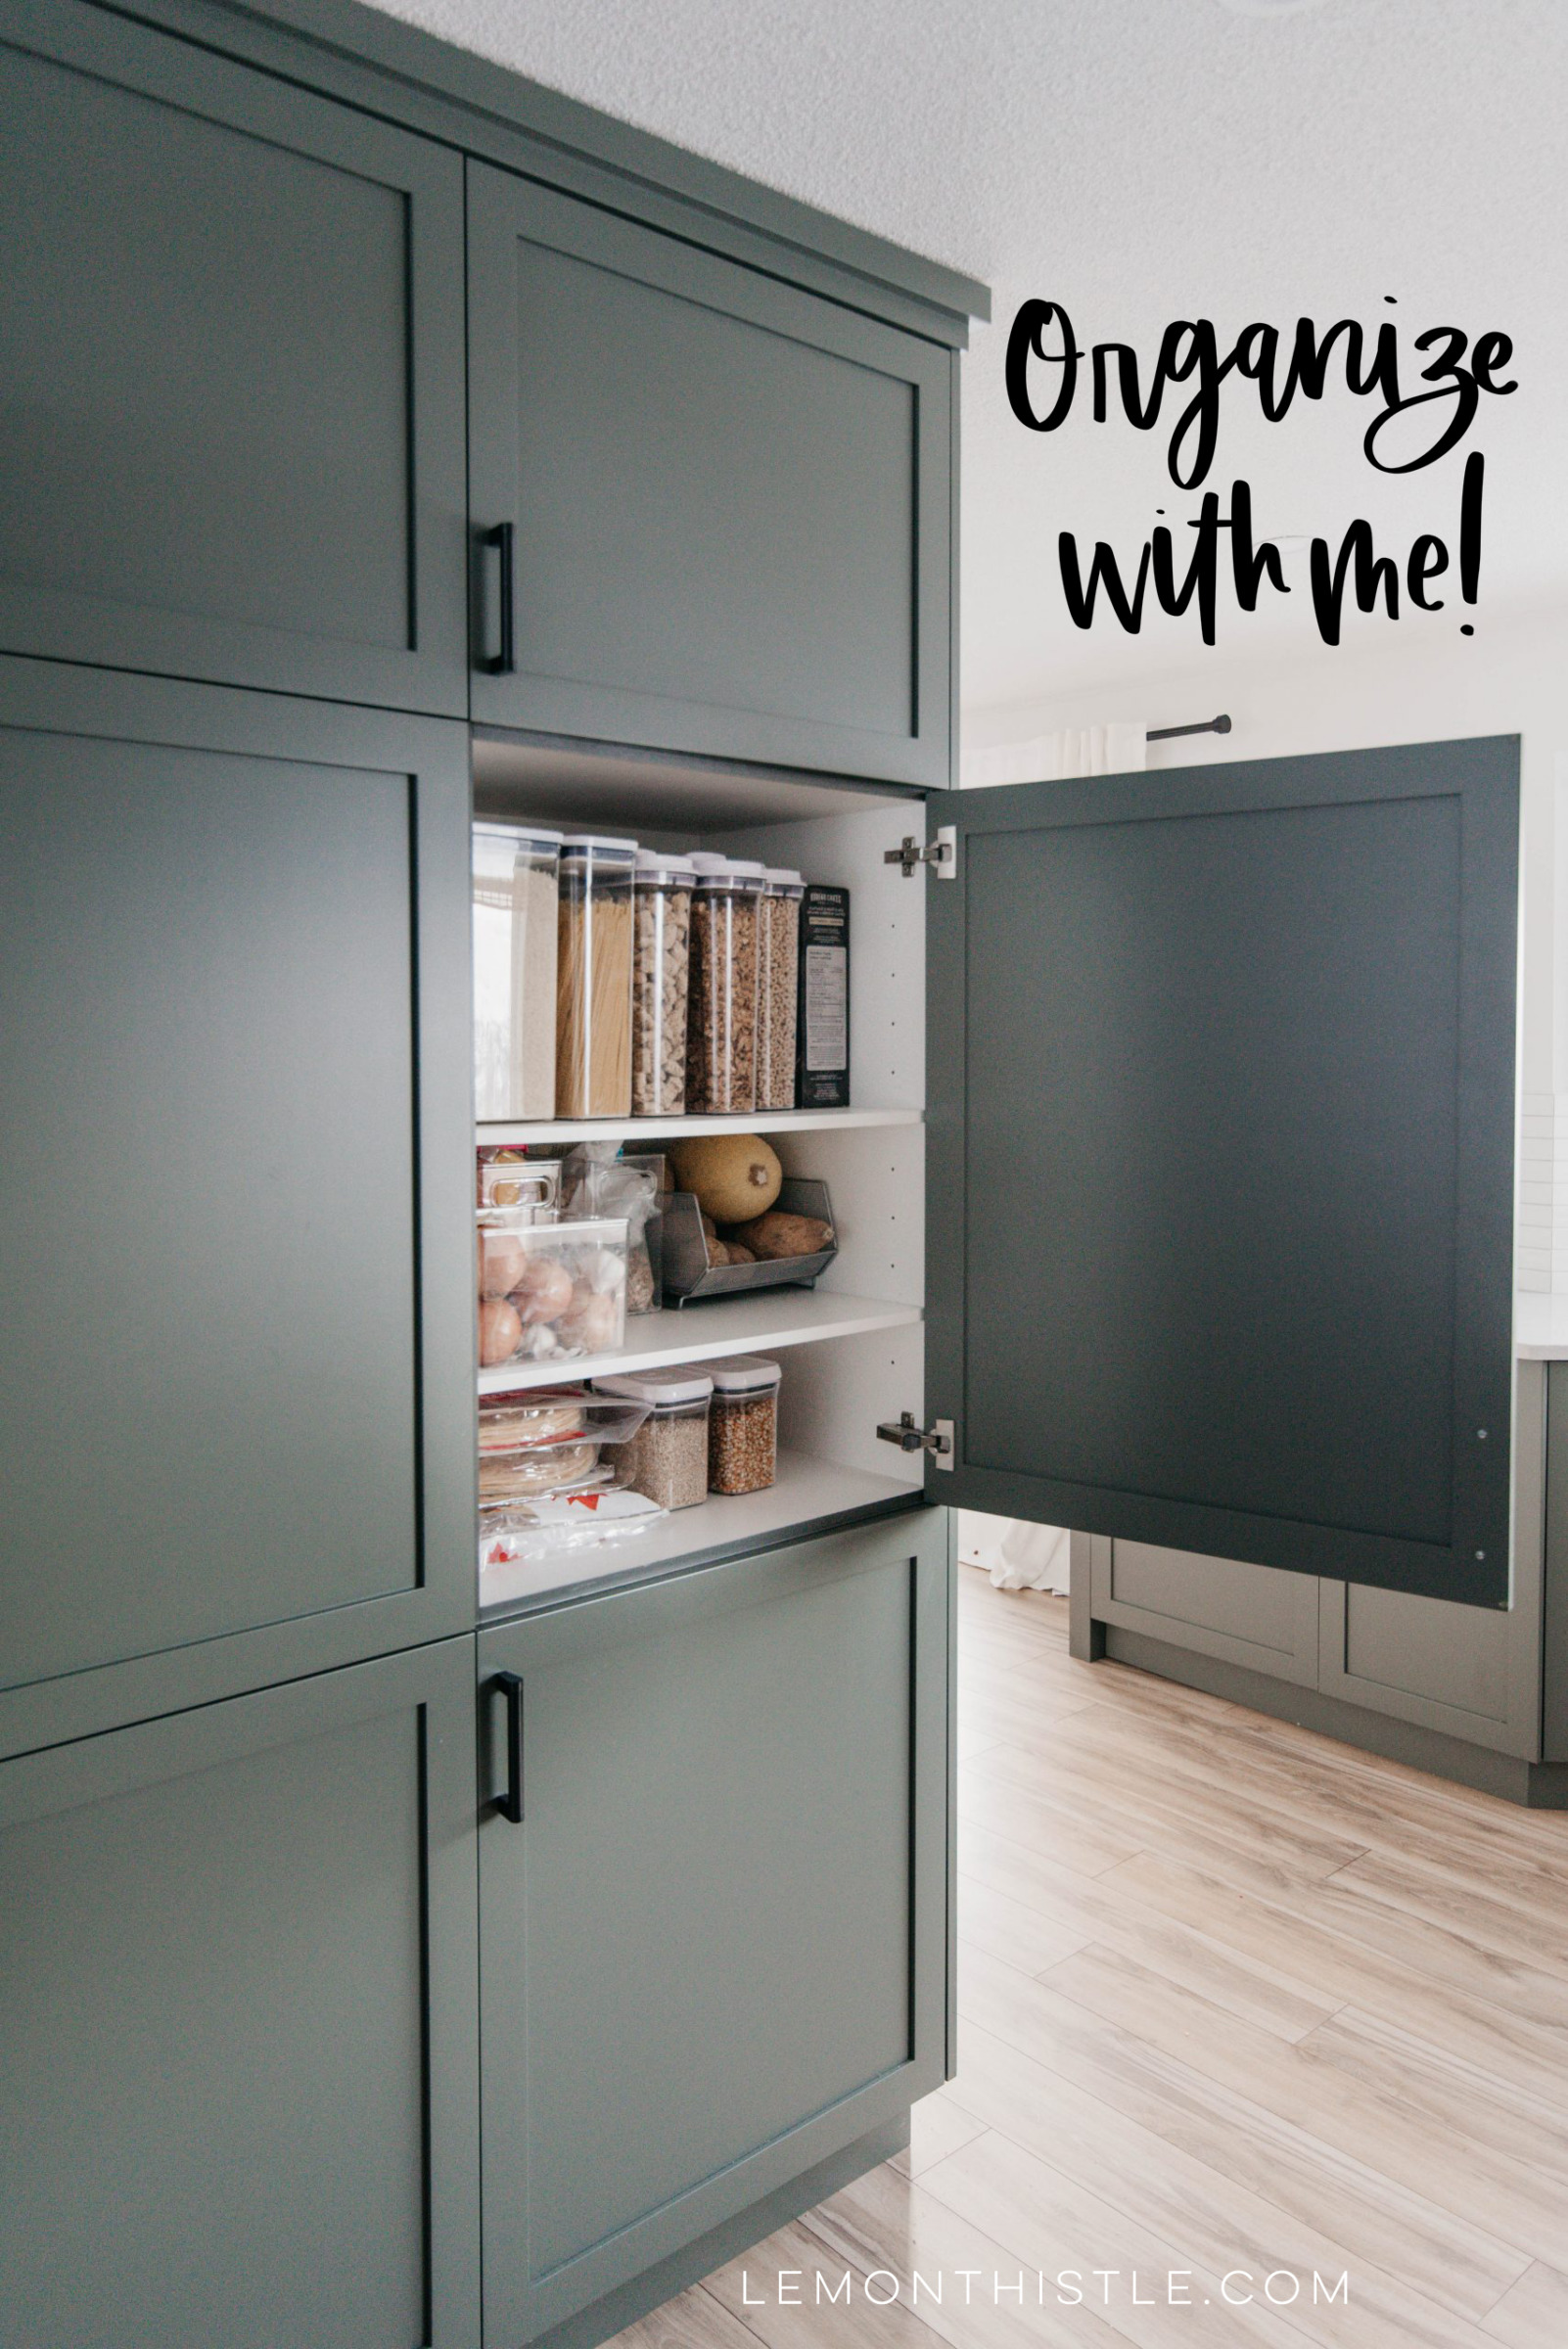 kitchen organization ideas for under the sink, kitchen linens, the pantry and the cleaning cupboard